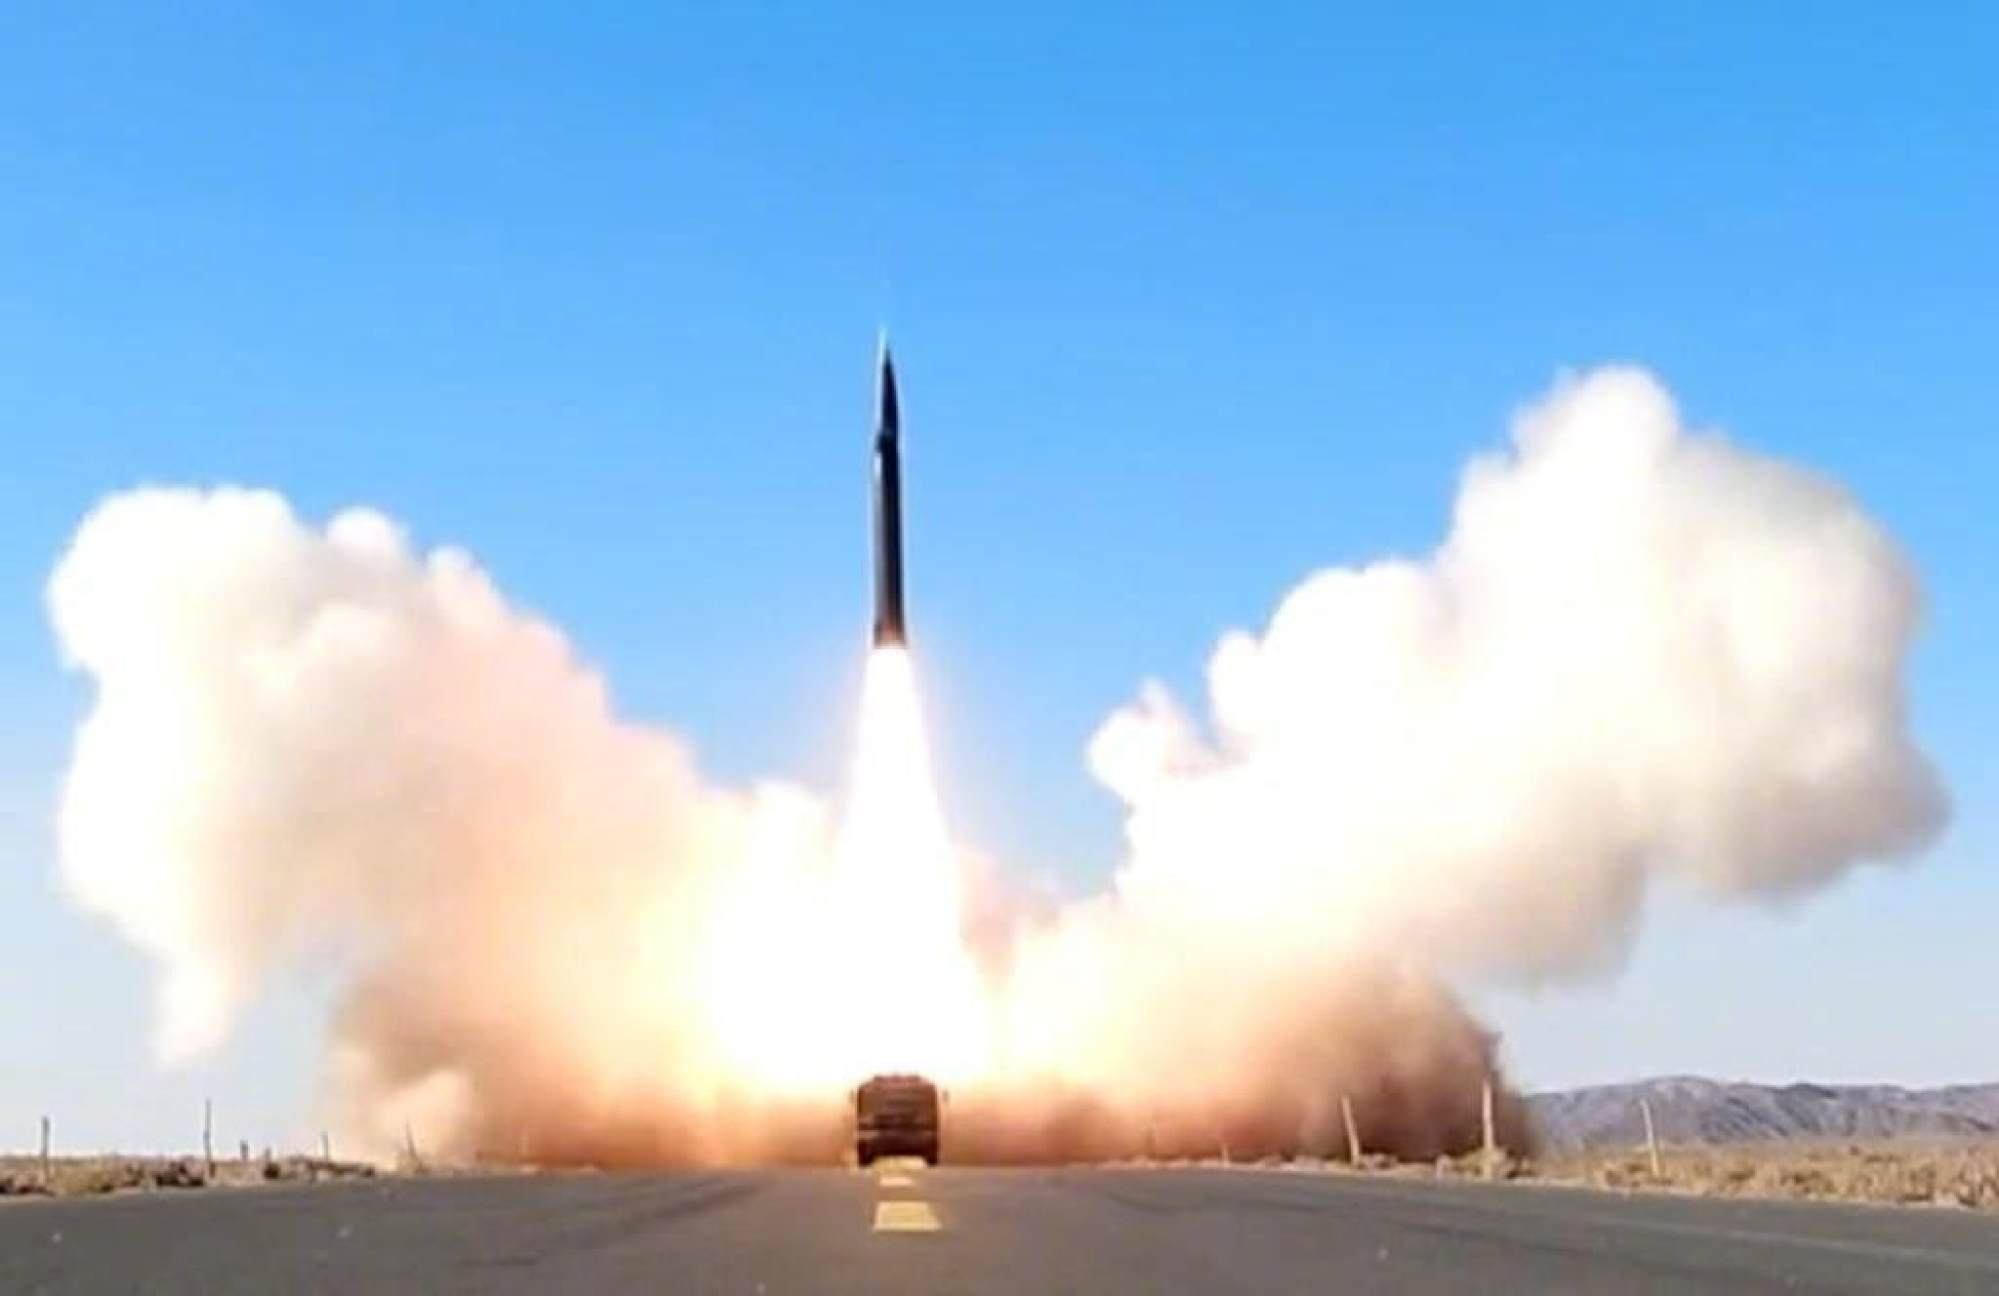 A DF-17 hypersonic boost-glide missile is launched in a video clip broadcast by China’s CCTV last summer. Image: CCTV